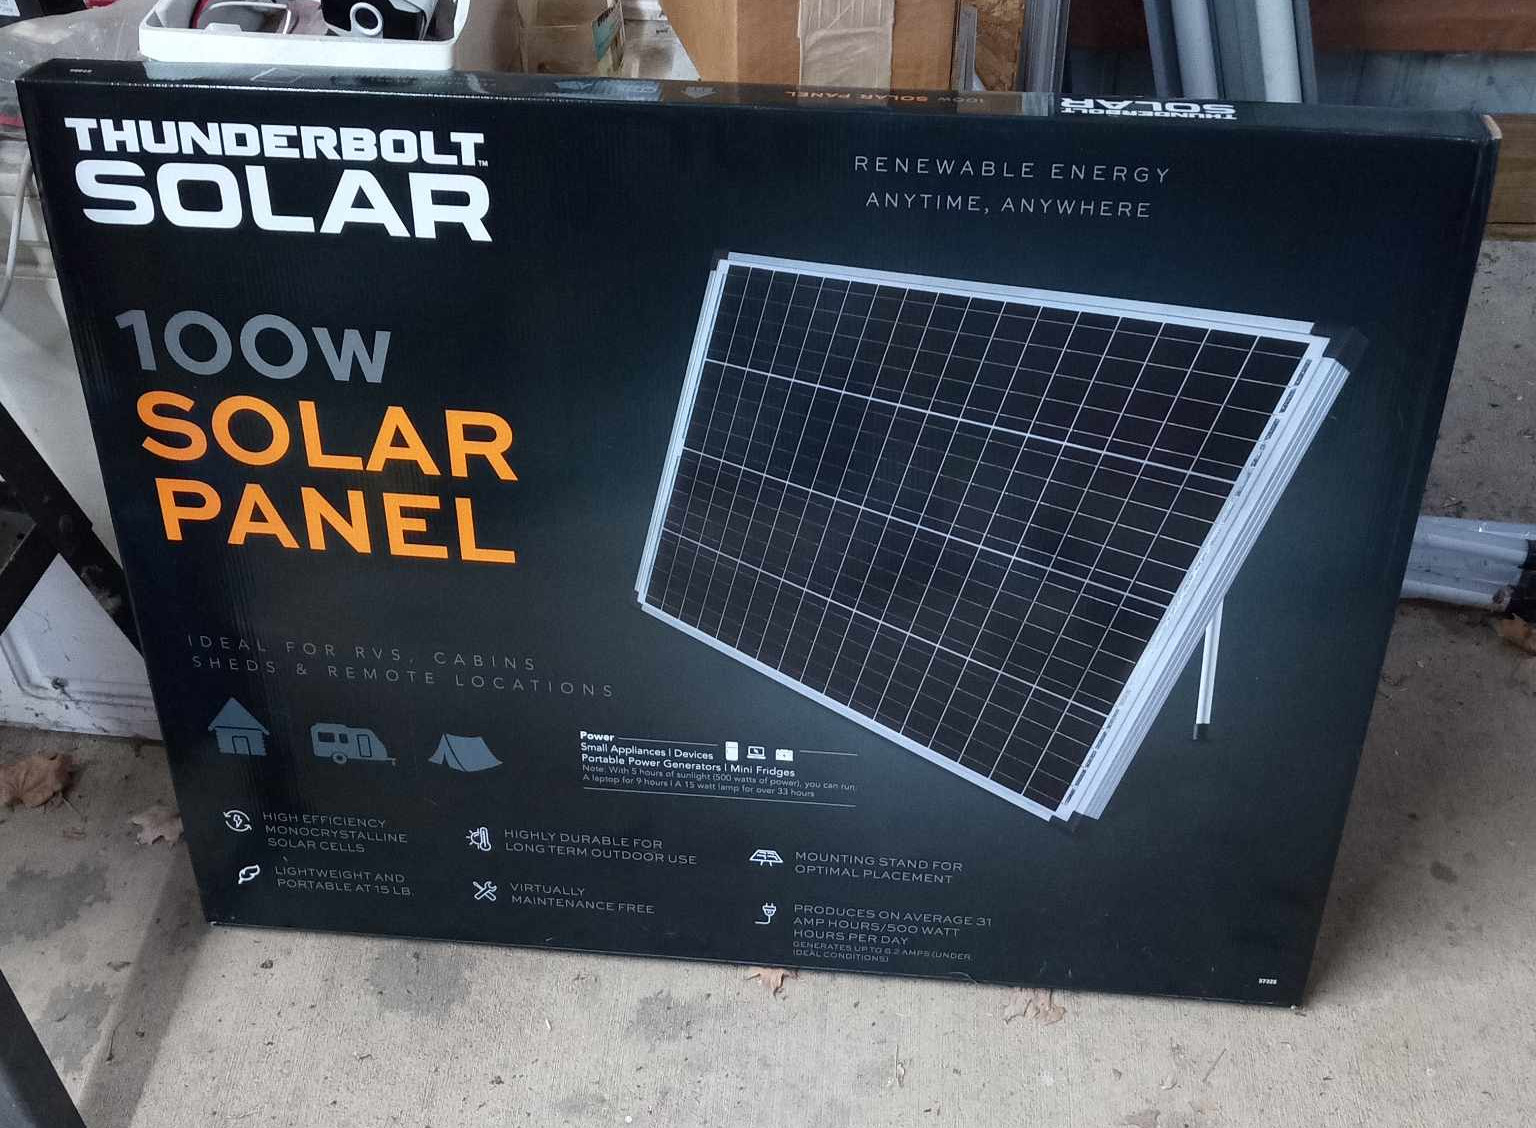 An overview of my Solar System, featuring a Harbor Freight Thunderbolt 100 WATT Panel.